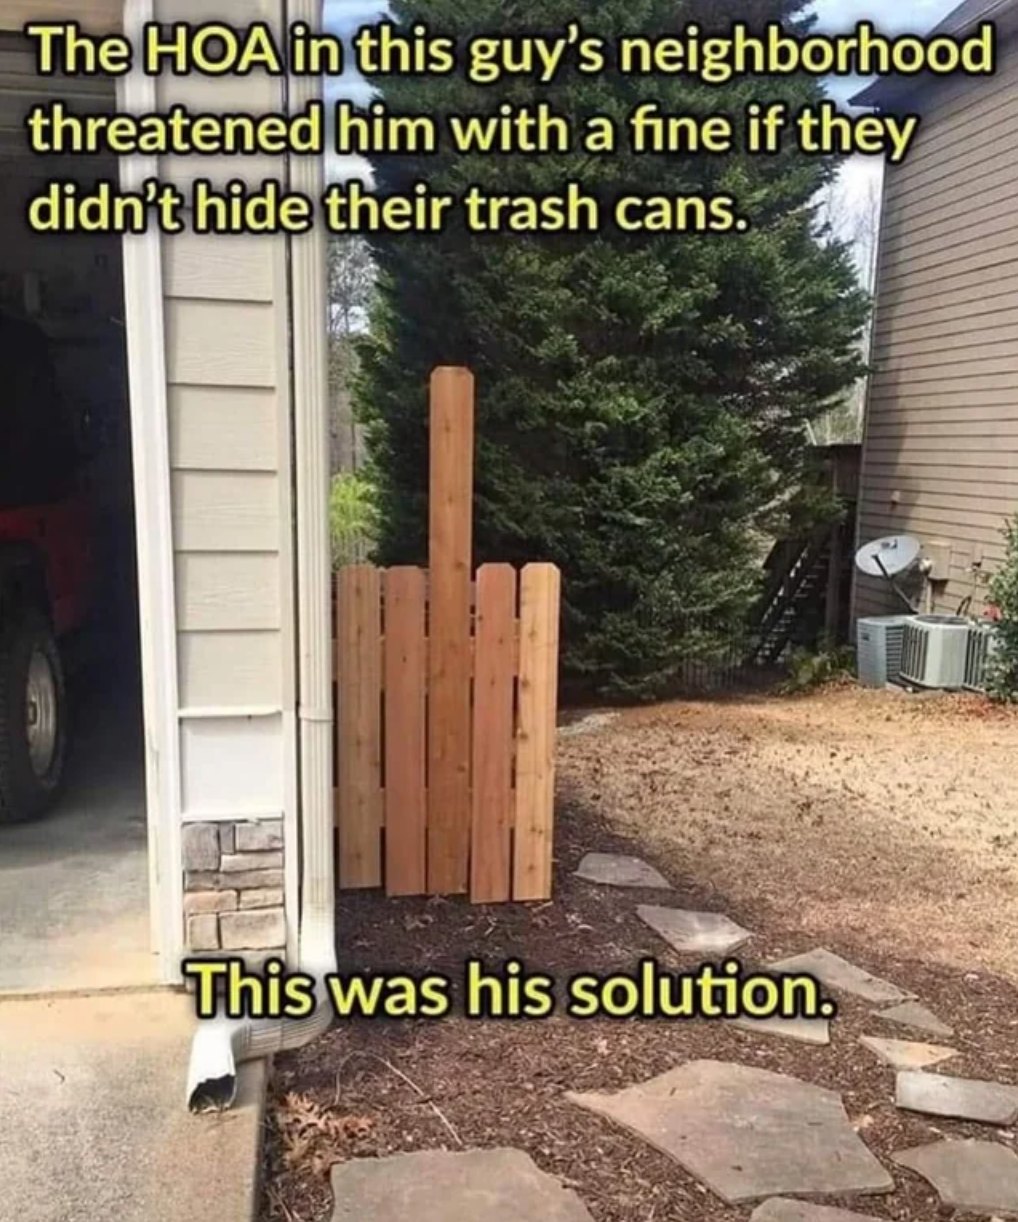 the hoa in this guy's neighborhood threatened him with a fine if they didn't hide their trash cans, this was his solution, middle finger fence